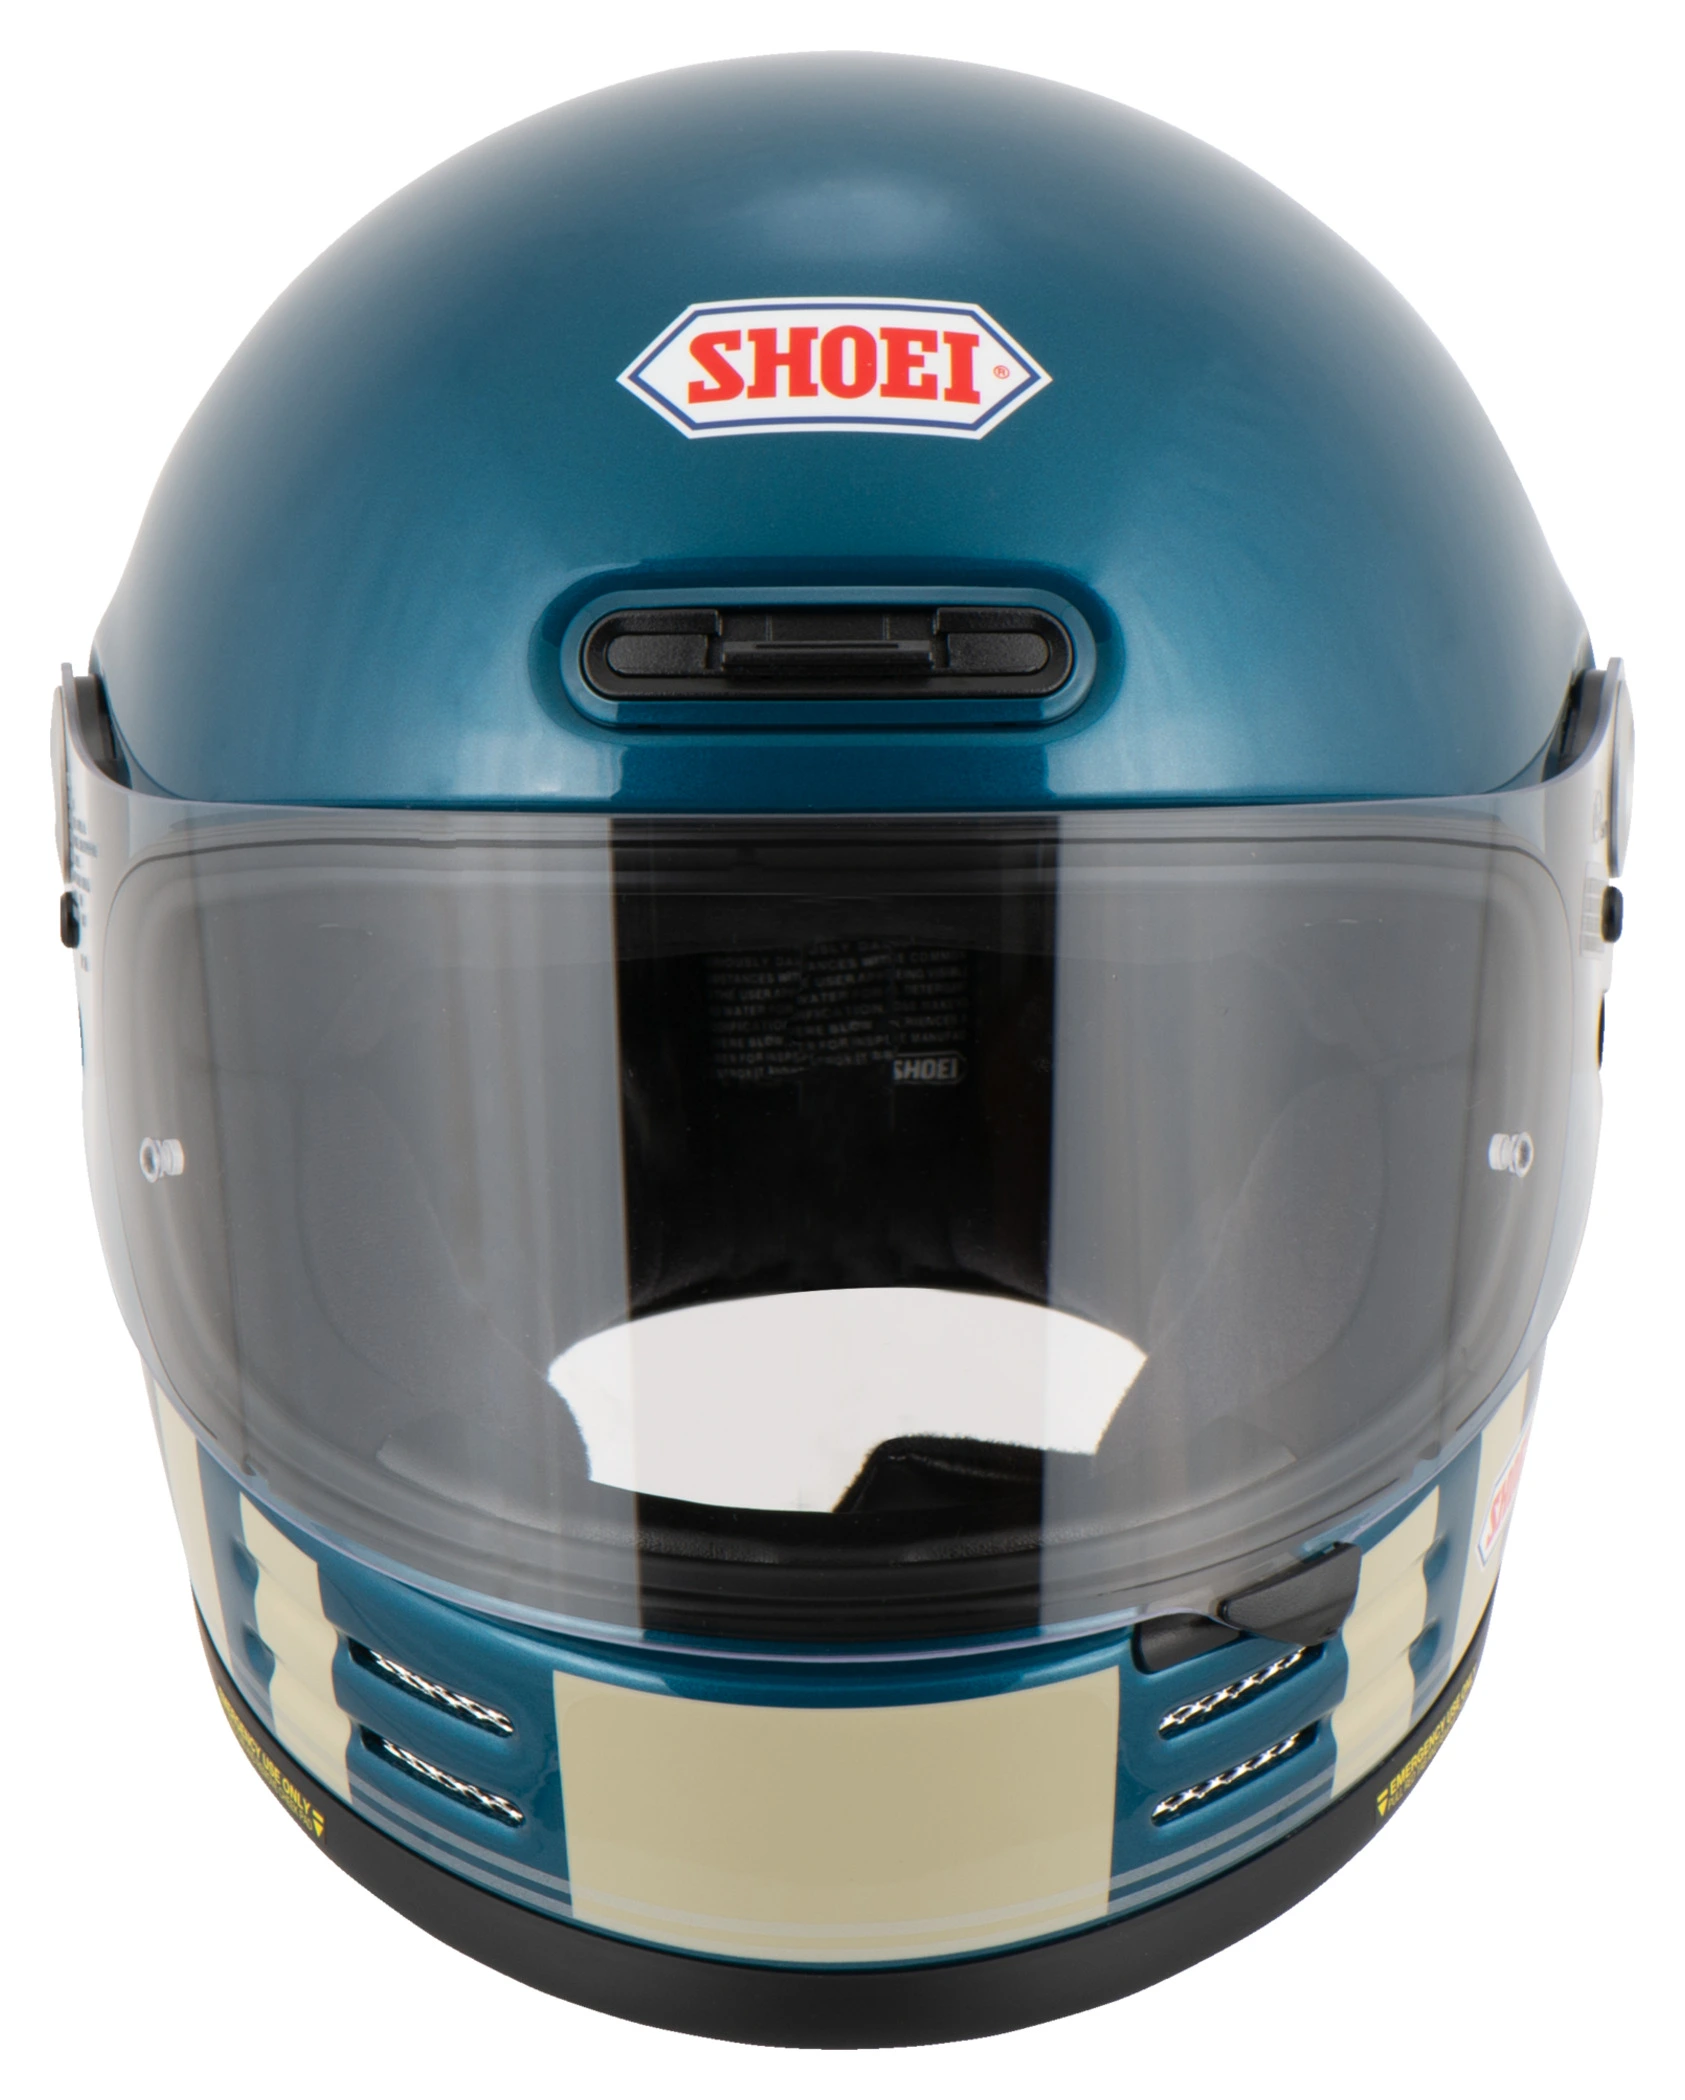 SHOEI GLAMSTER   SIZE XS